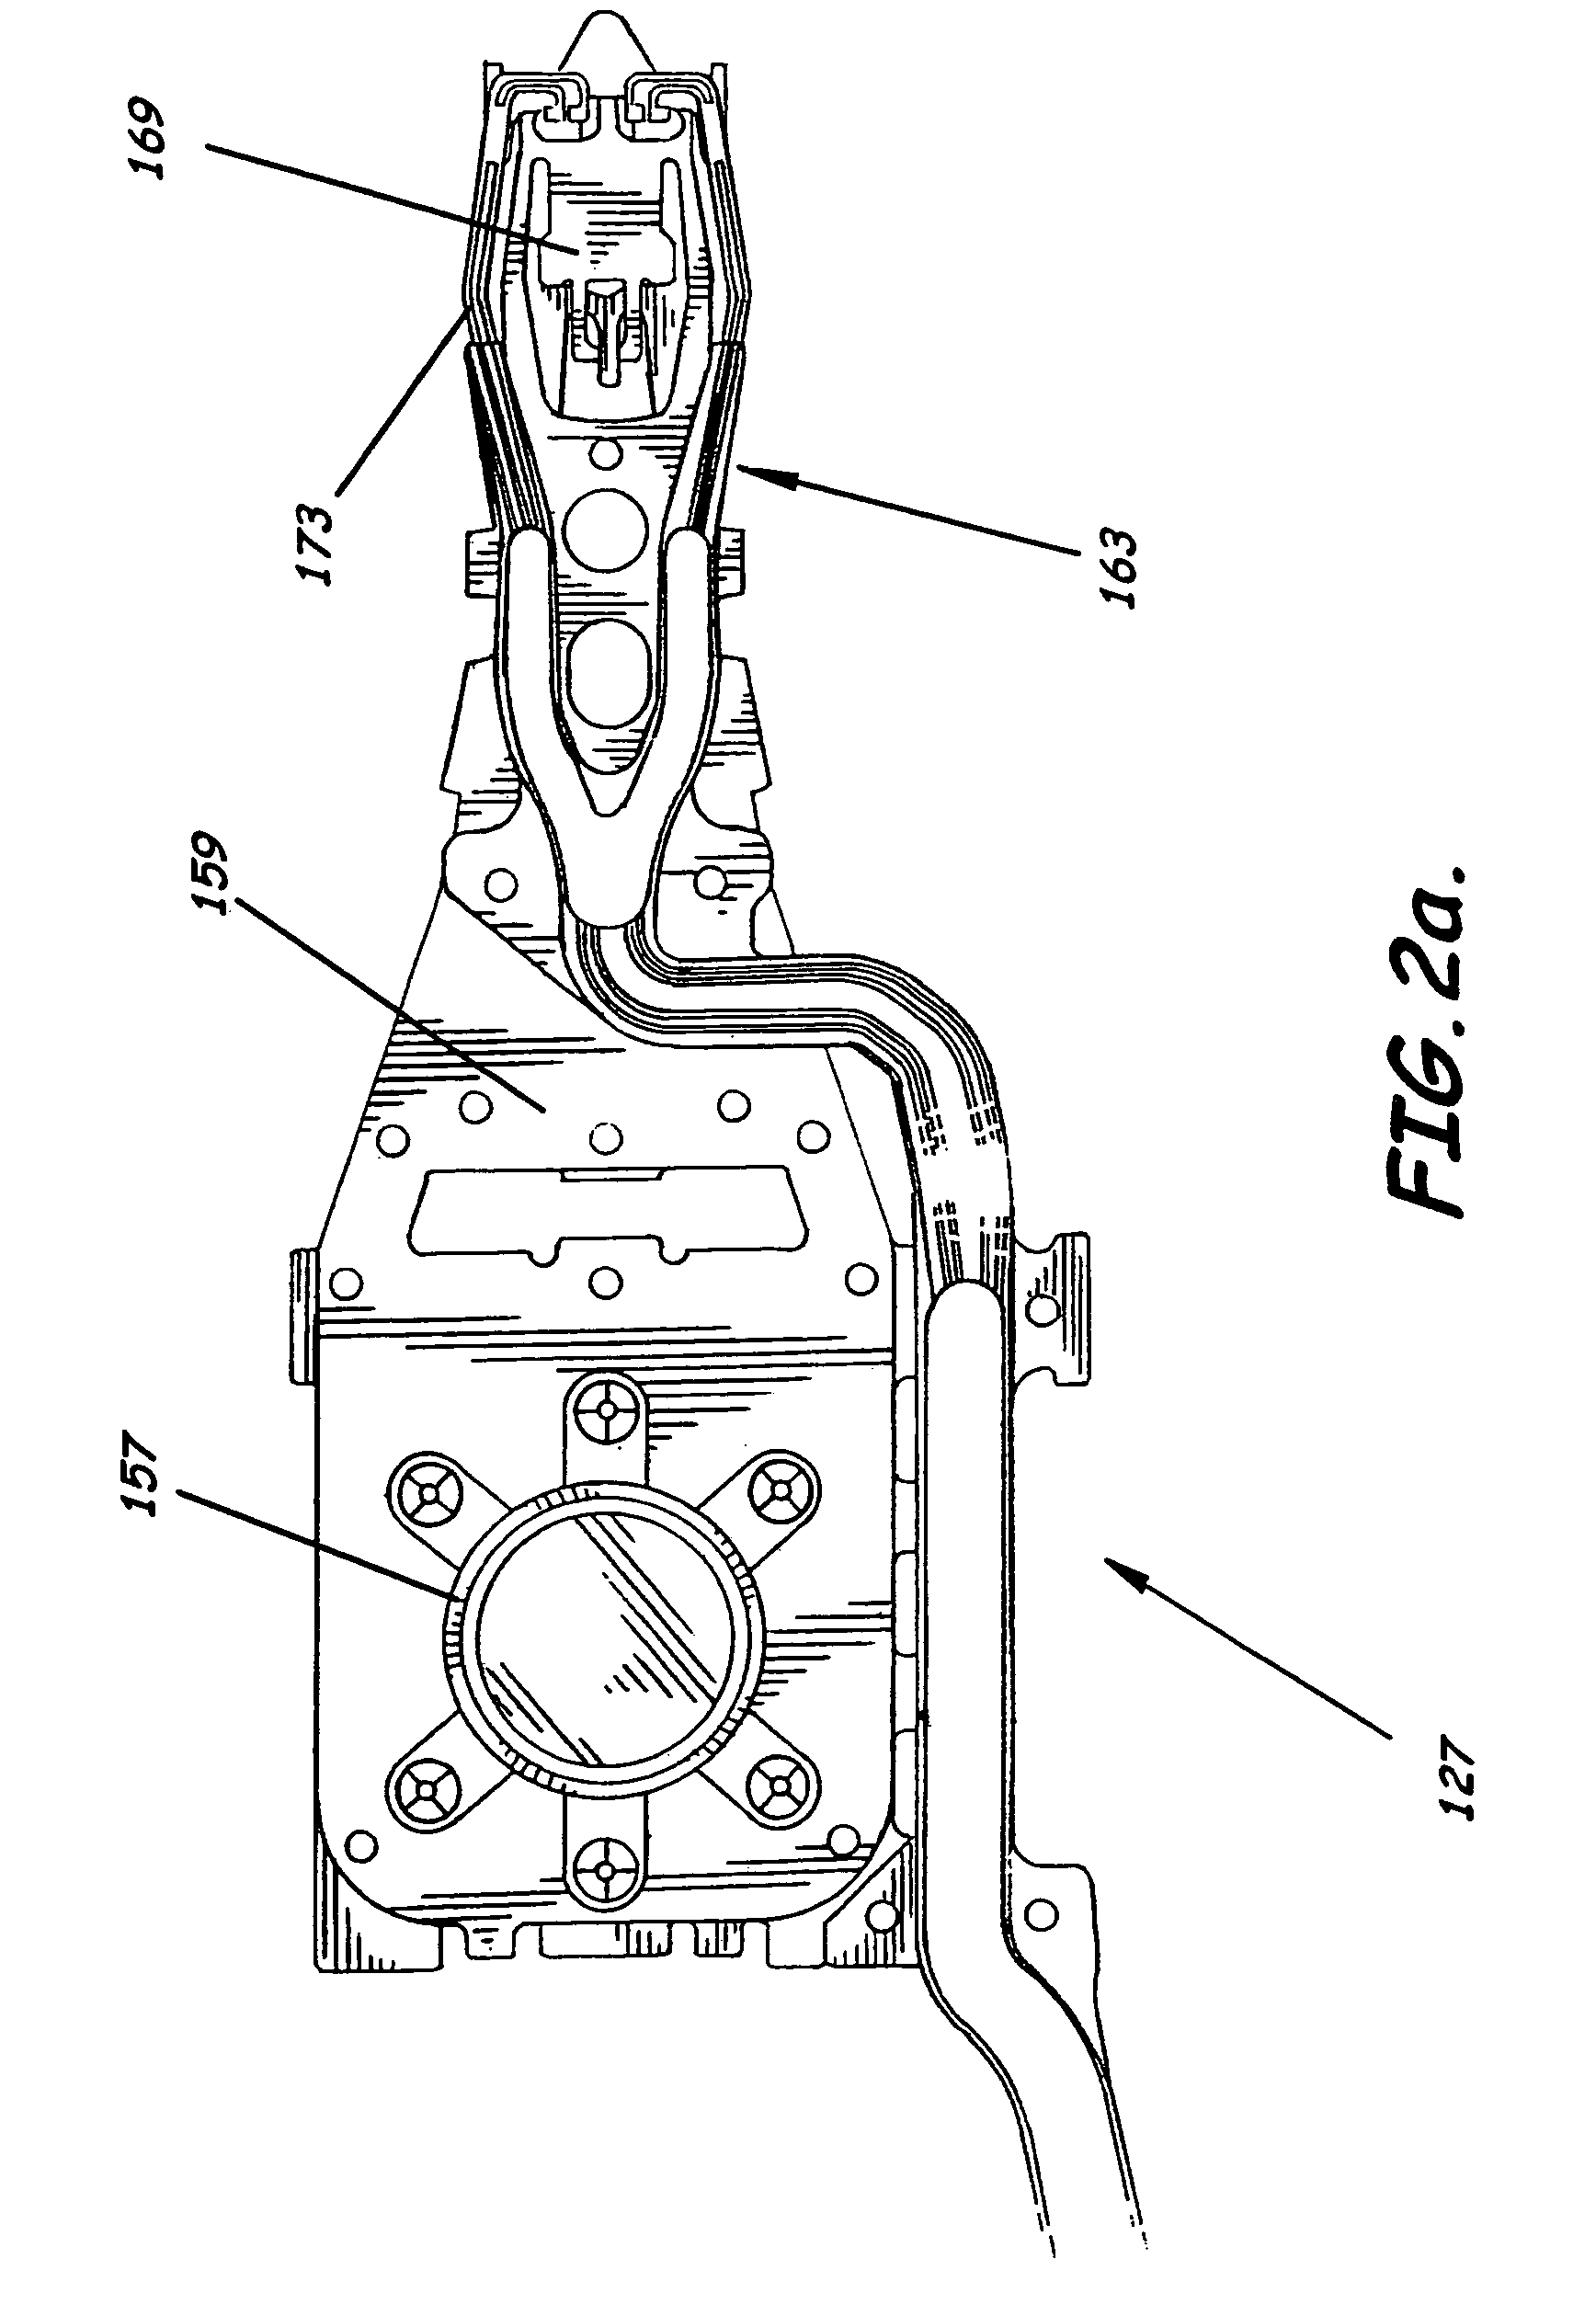 Disk drive with controlled pitch static attitude of sliders on integrated lead suspensions by improved plastic deformation processing